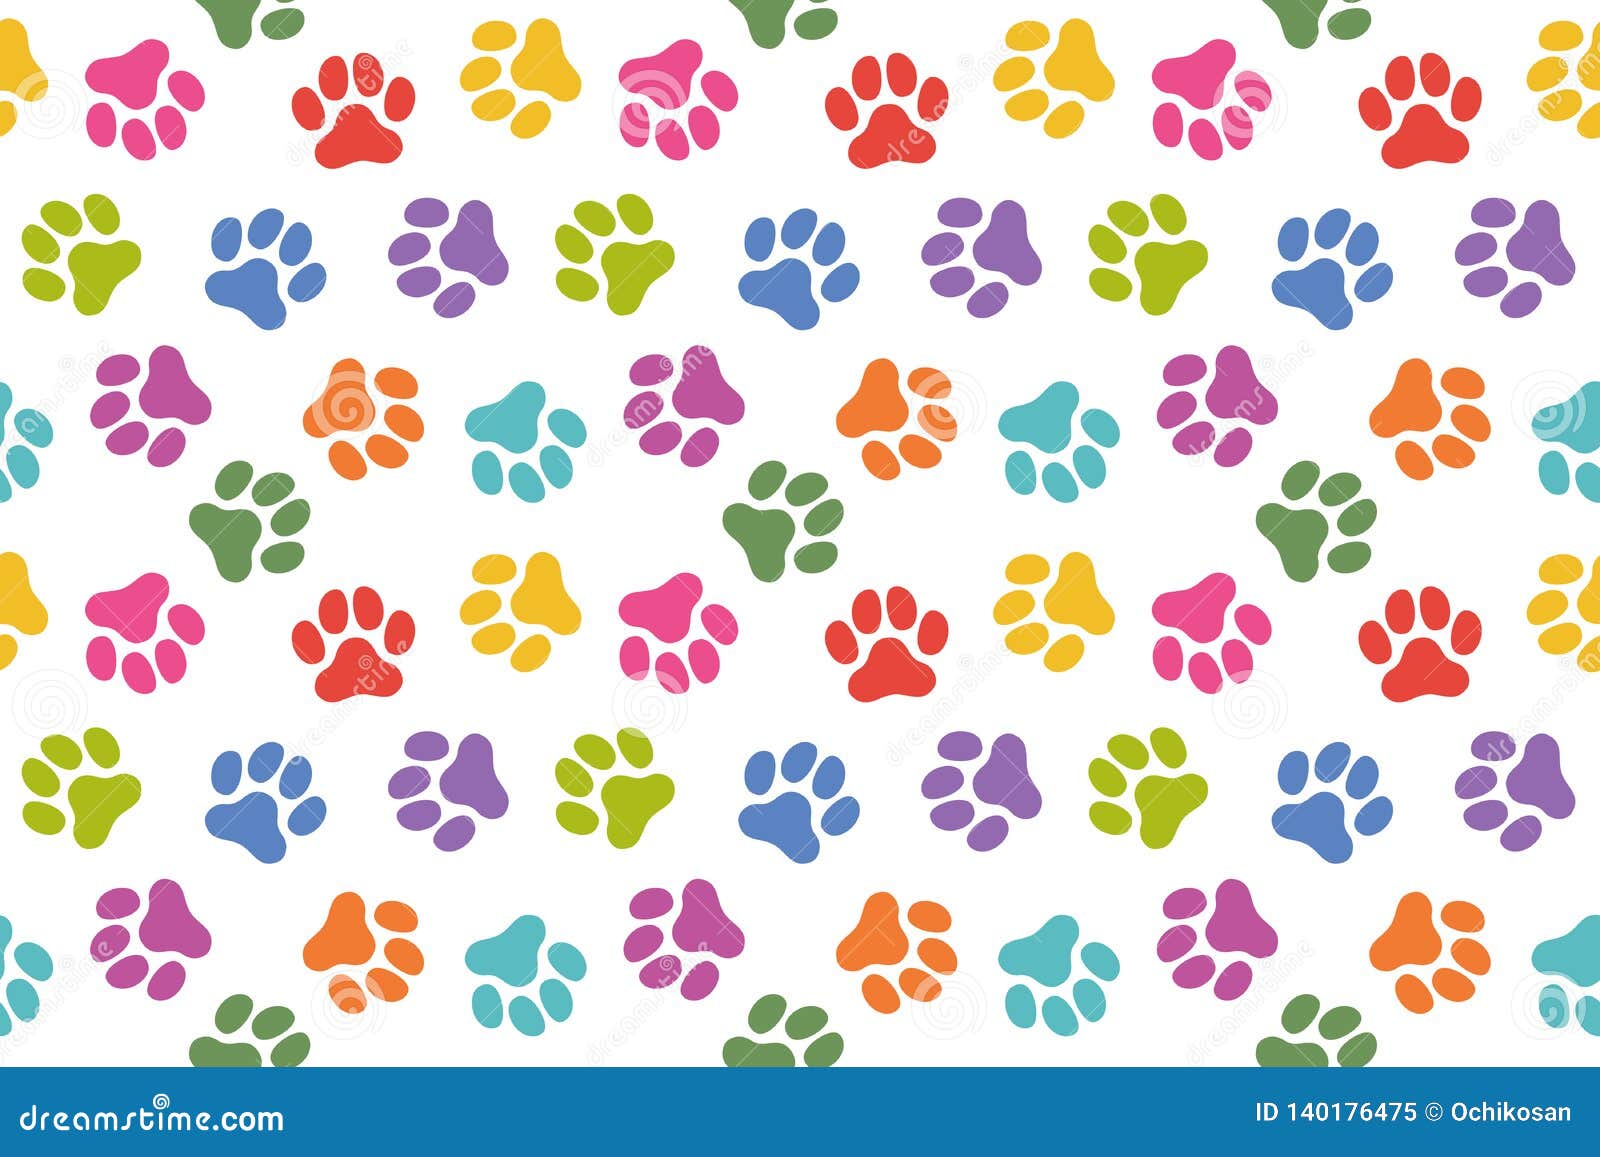 Dog Paw Prints Seamless Pattern Vector Stock Vector - Illustration of